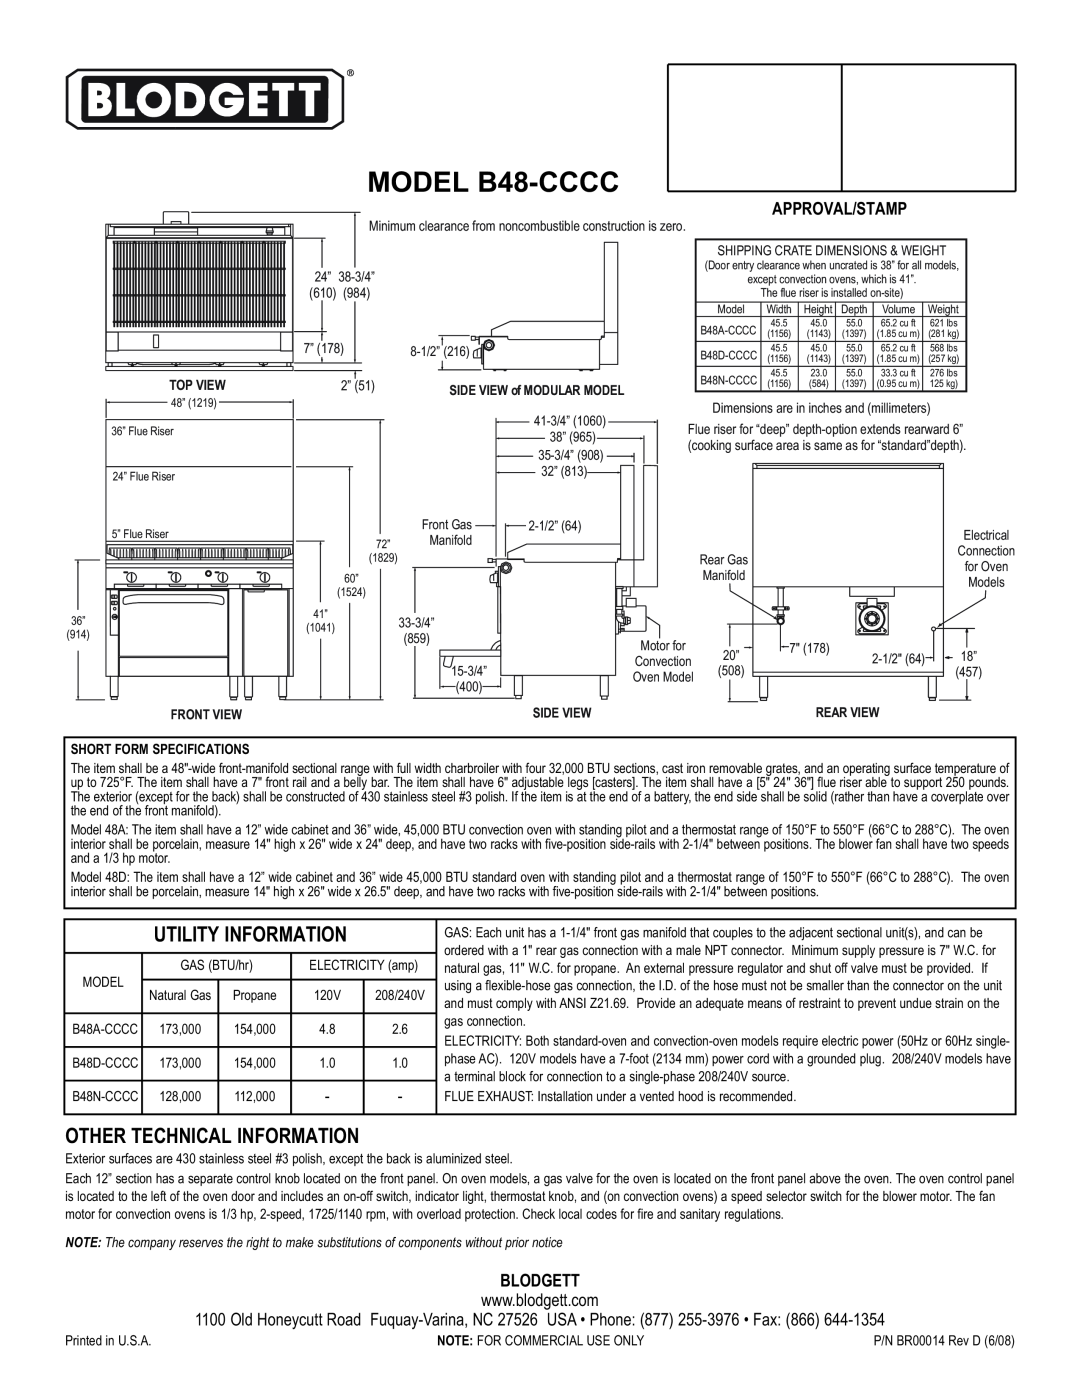 Blodgett B48D-CCCC MODEL B48-CCCC, Utility Information, Other Technical Information, Blodgett, Approval/Stamp, Top View 